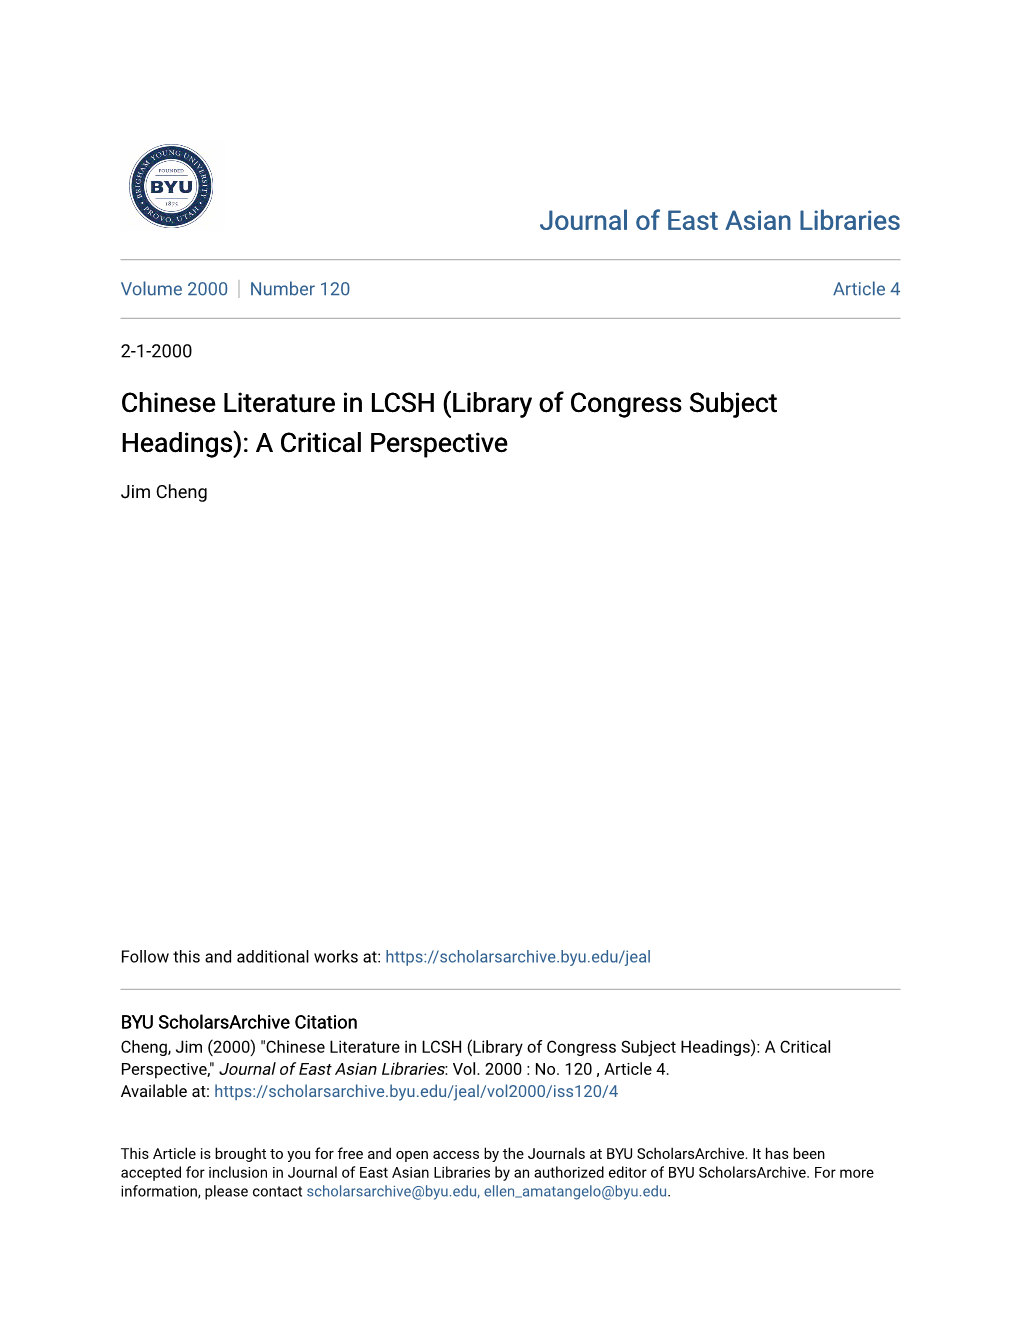 Library of Congress Subject Headings): a Critical Perspective